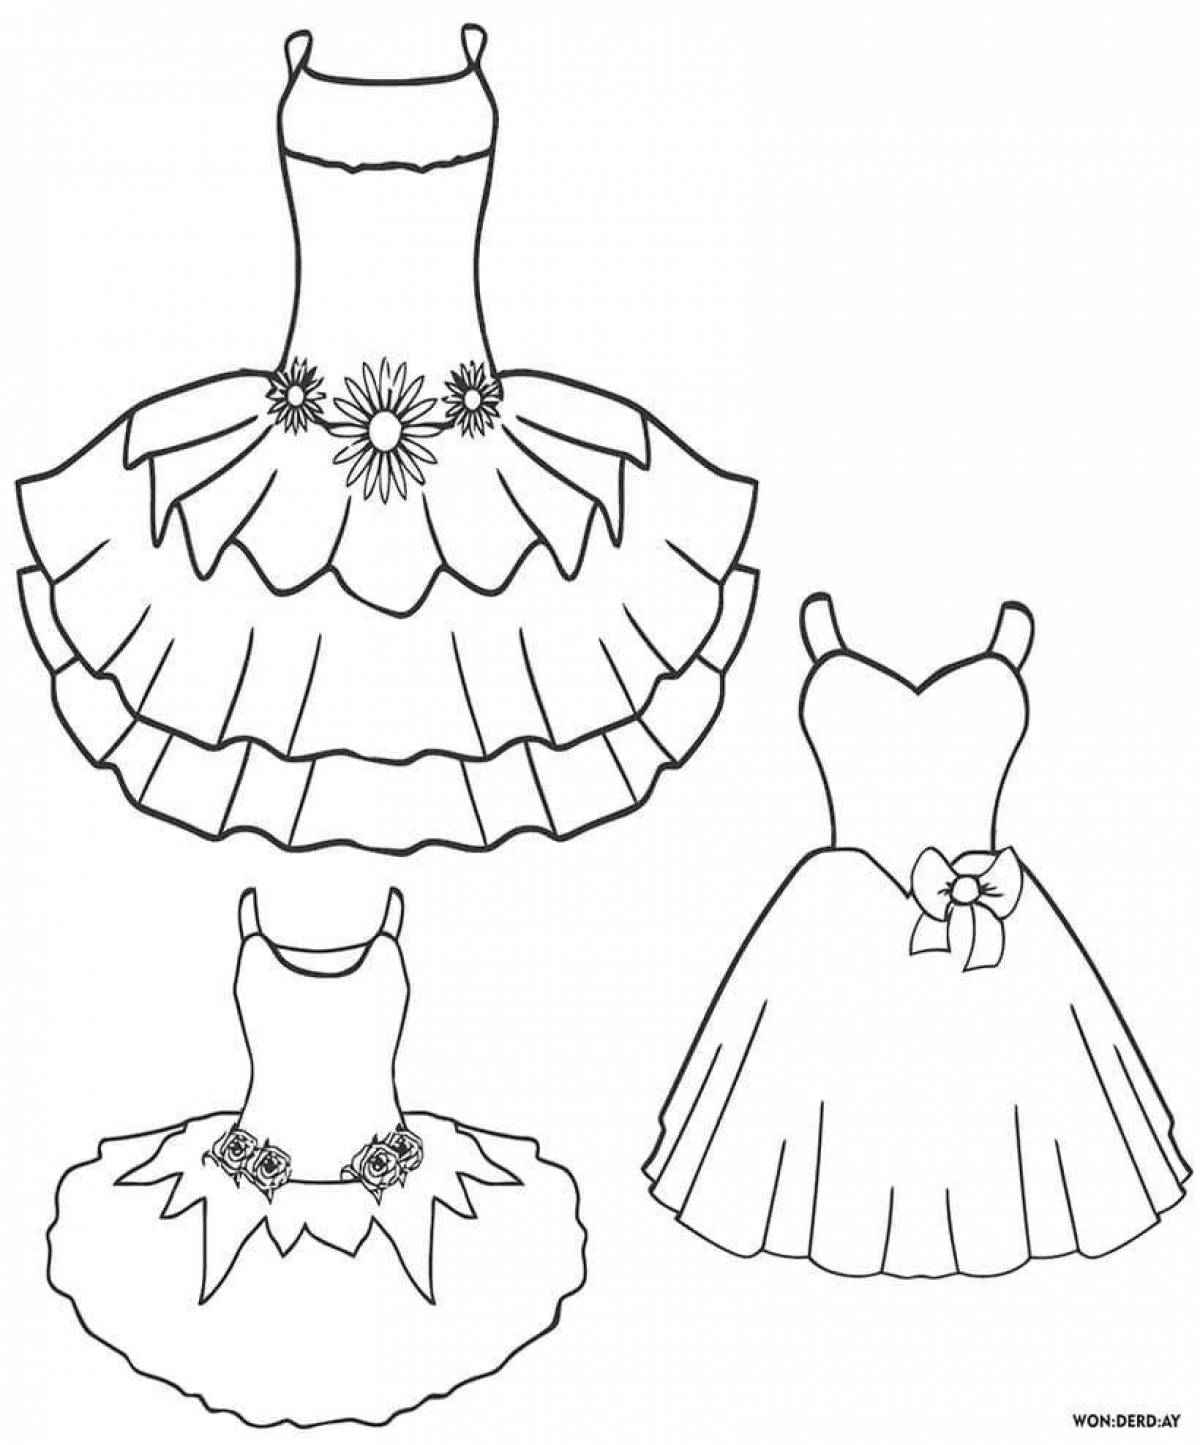 Coloring page beautiful dress for the doll